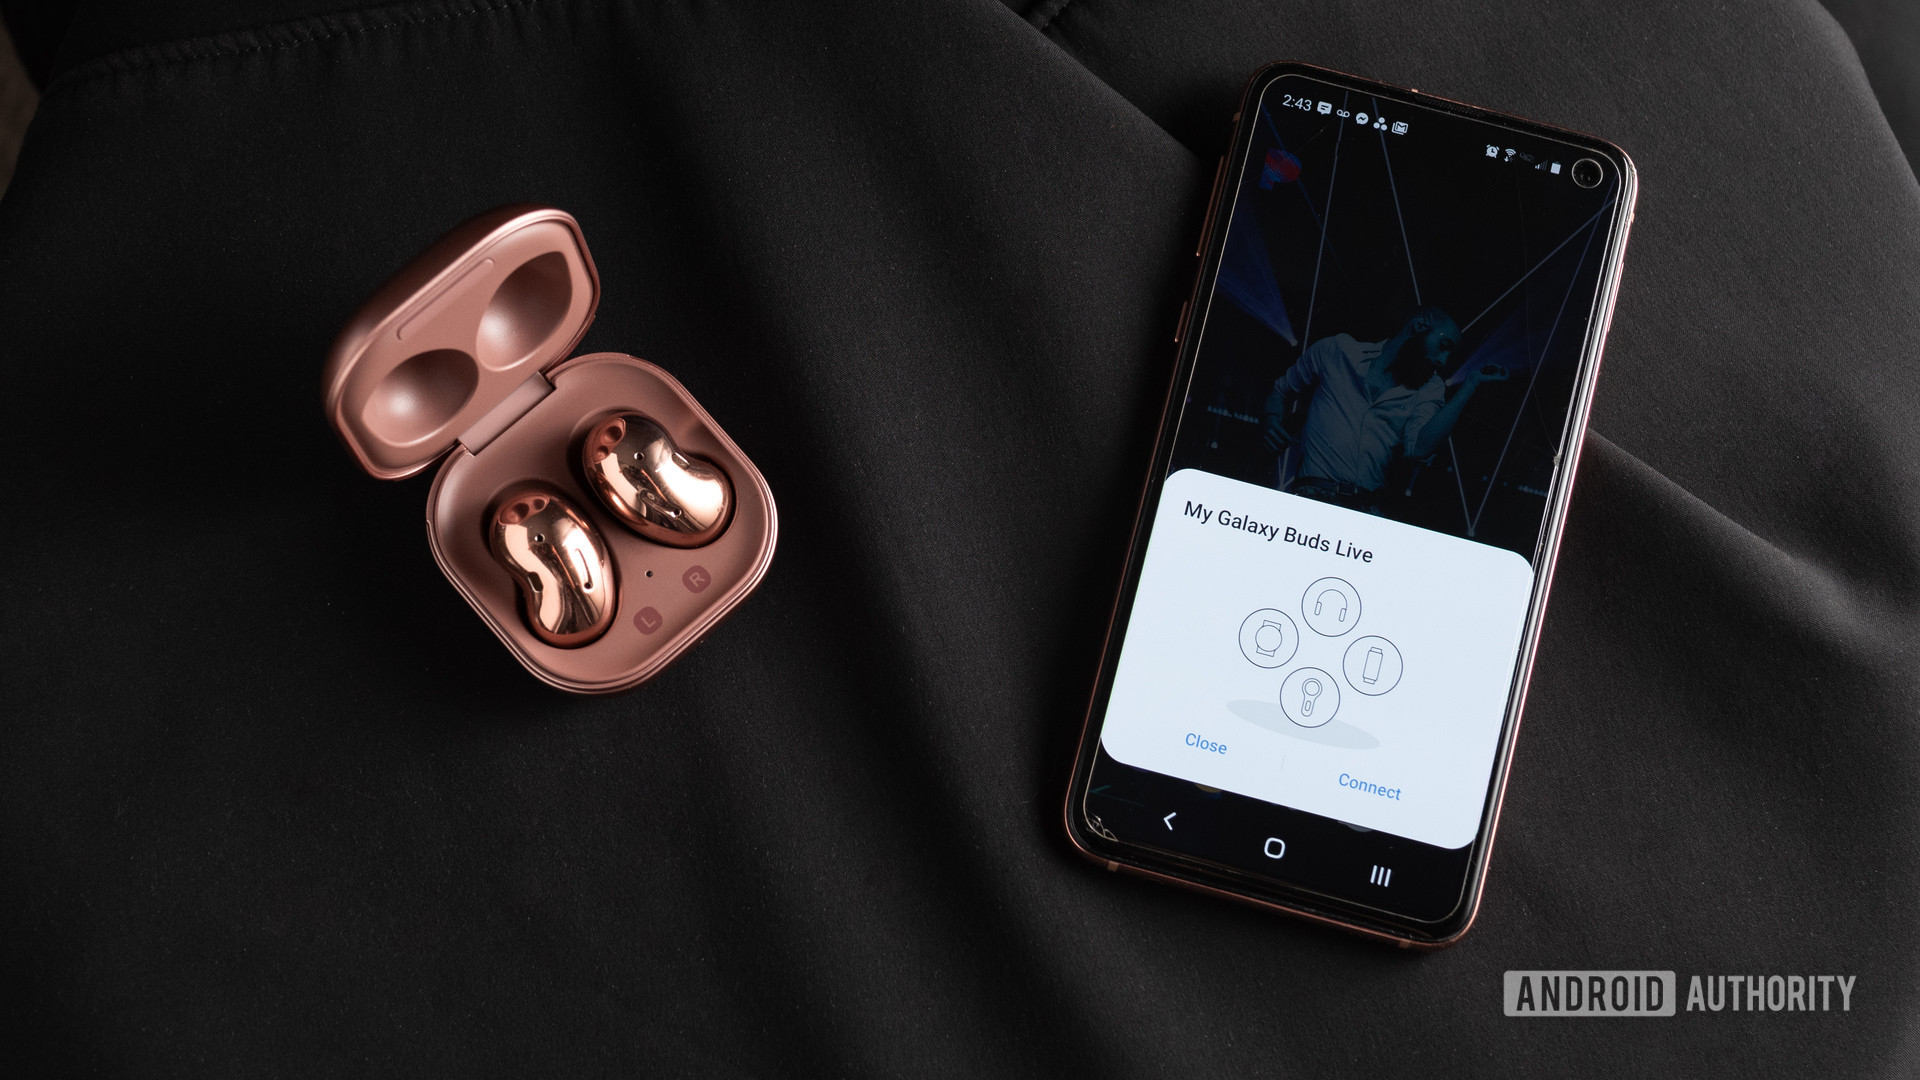 A picture of the Samsung Galaxy Buds Live noise cancelling true wireless earbuds in the open case next to a Samsung Galaxy S10e smartphone with quick pairing.